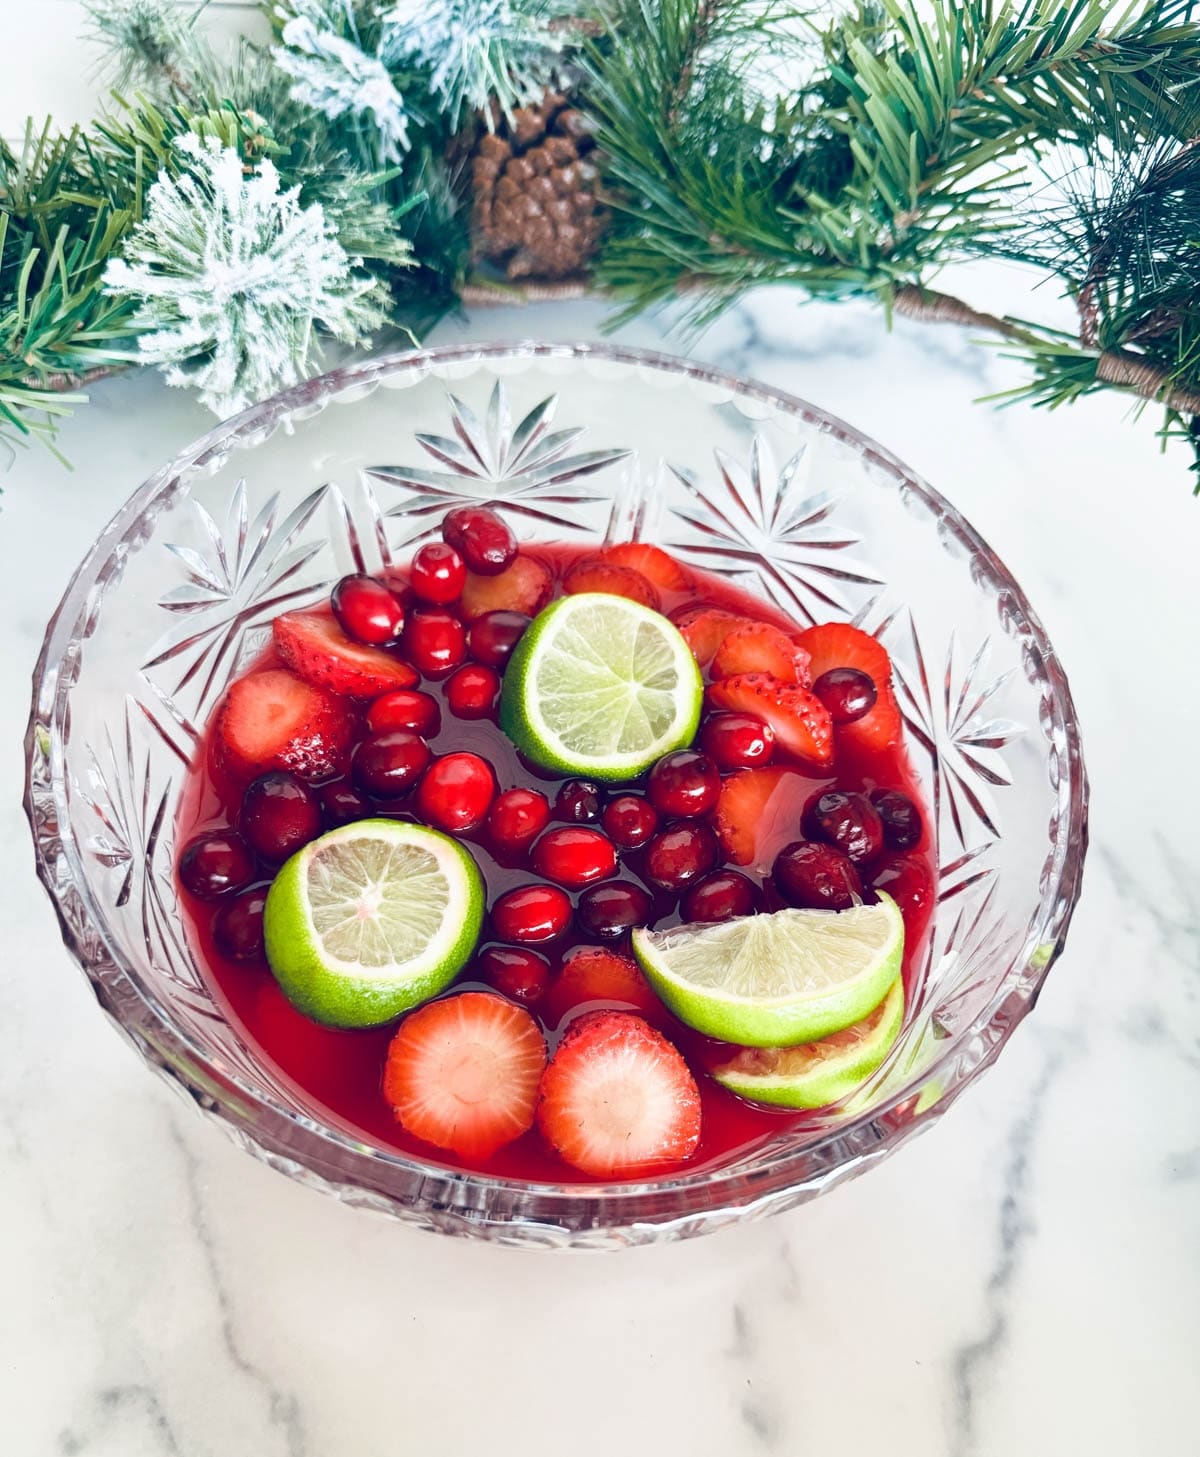 Juice and fruits in a glass punch bowl with Christmas greenery in background.